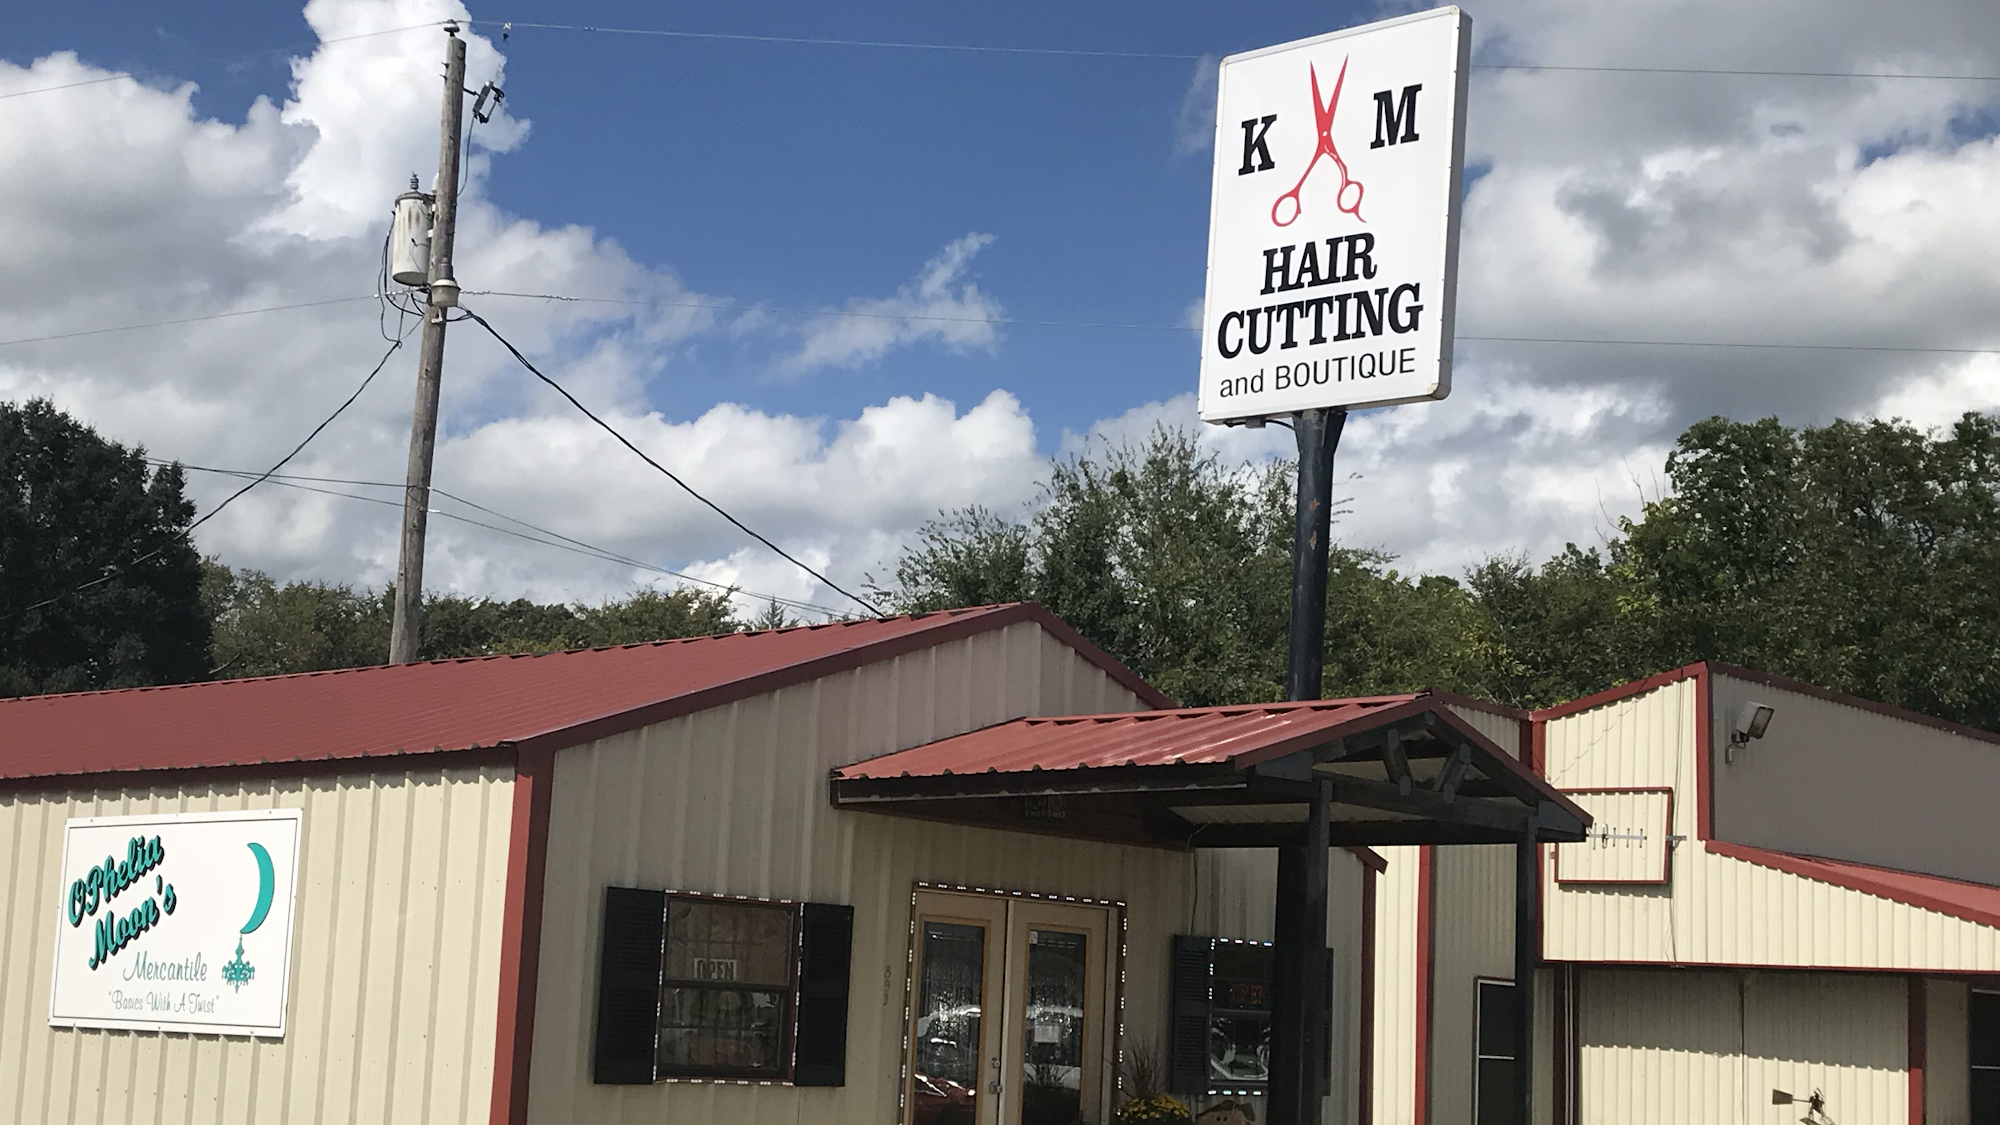 K&M Haircutting and Boutique